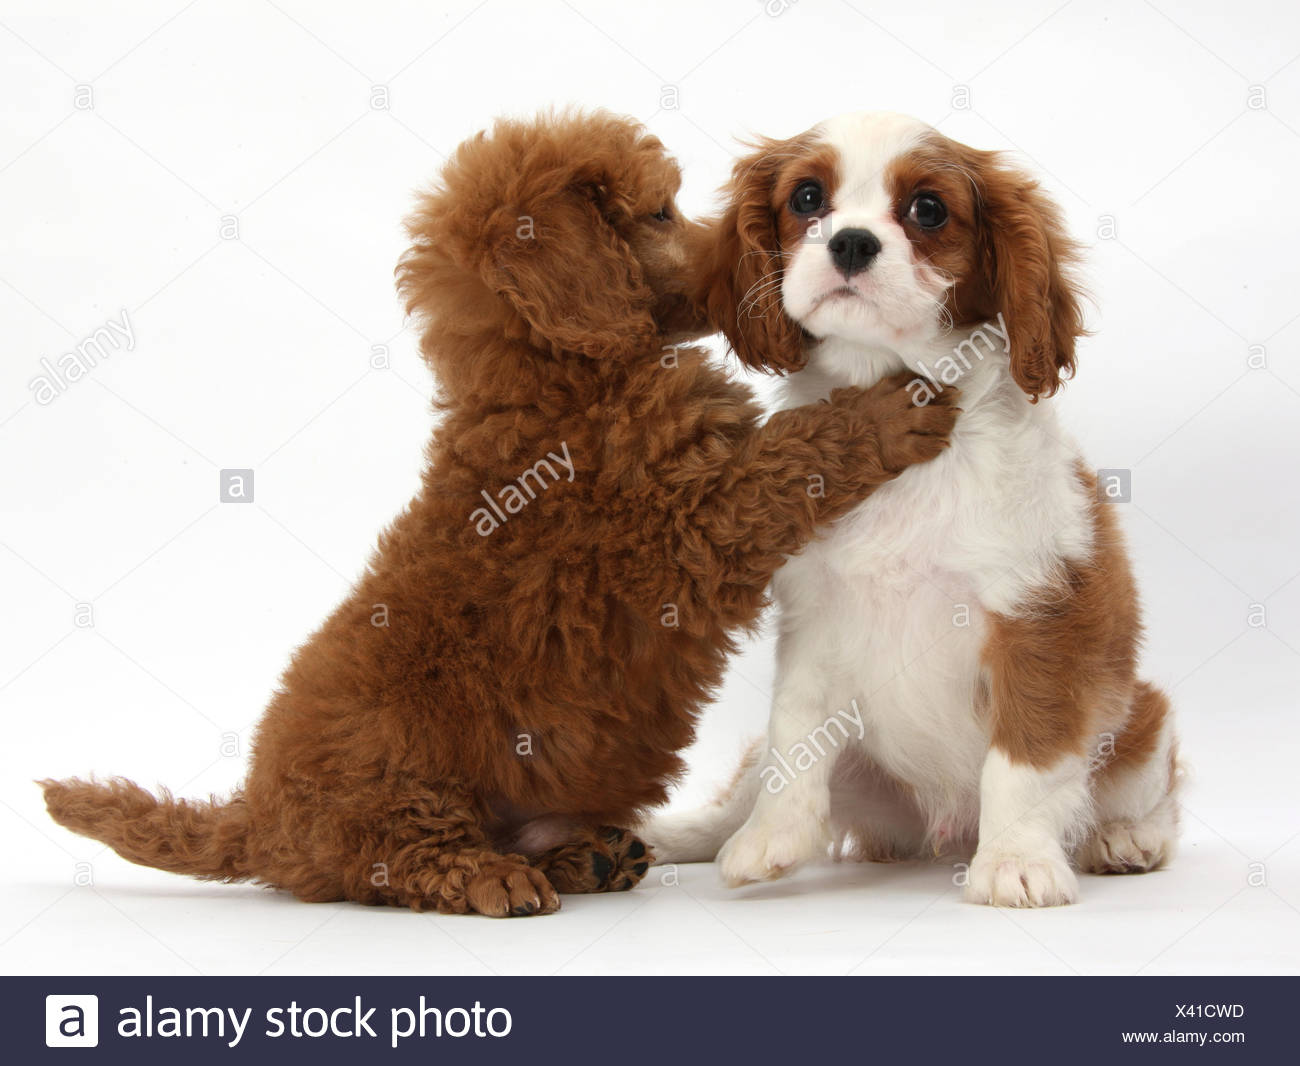 Blenheim Cavalier King Charles Spaniel Puppy 11 Weeks With Apricot Miniature Poodle Puppy 8 Weeks Stock Photo Alamy